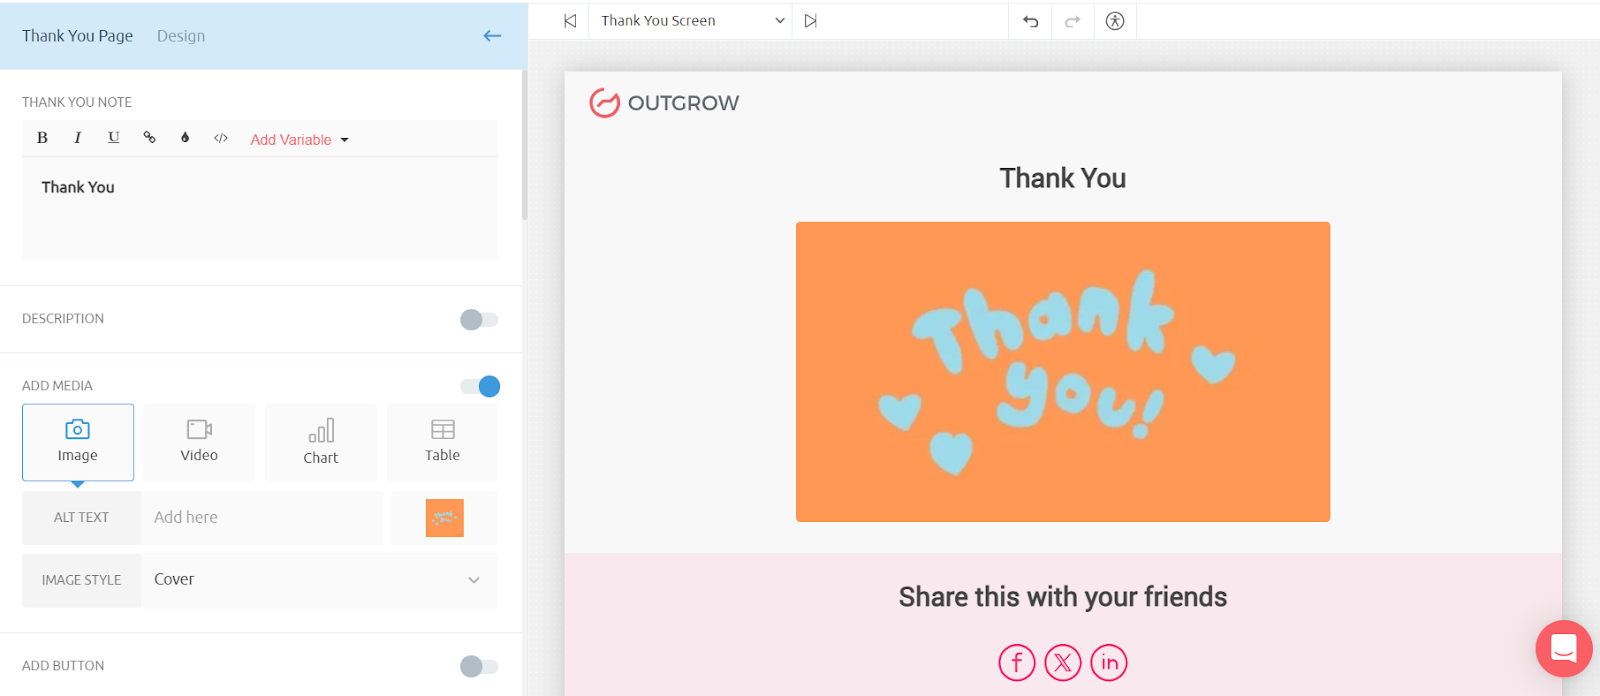 Outgrow's thankyou/result page